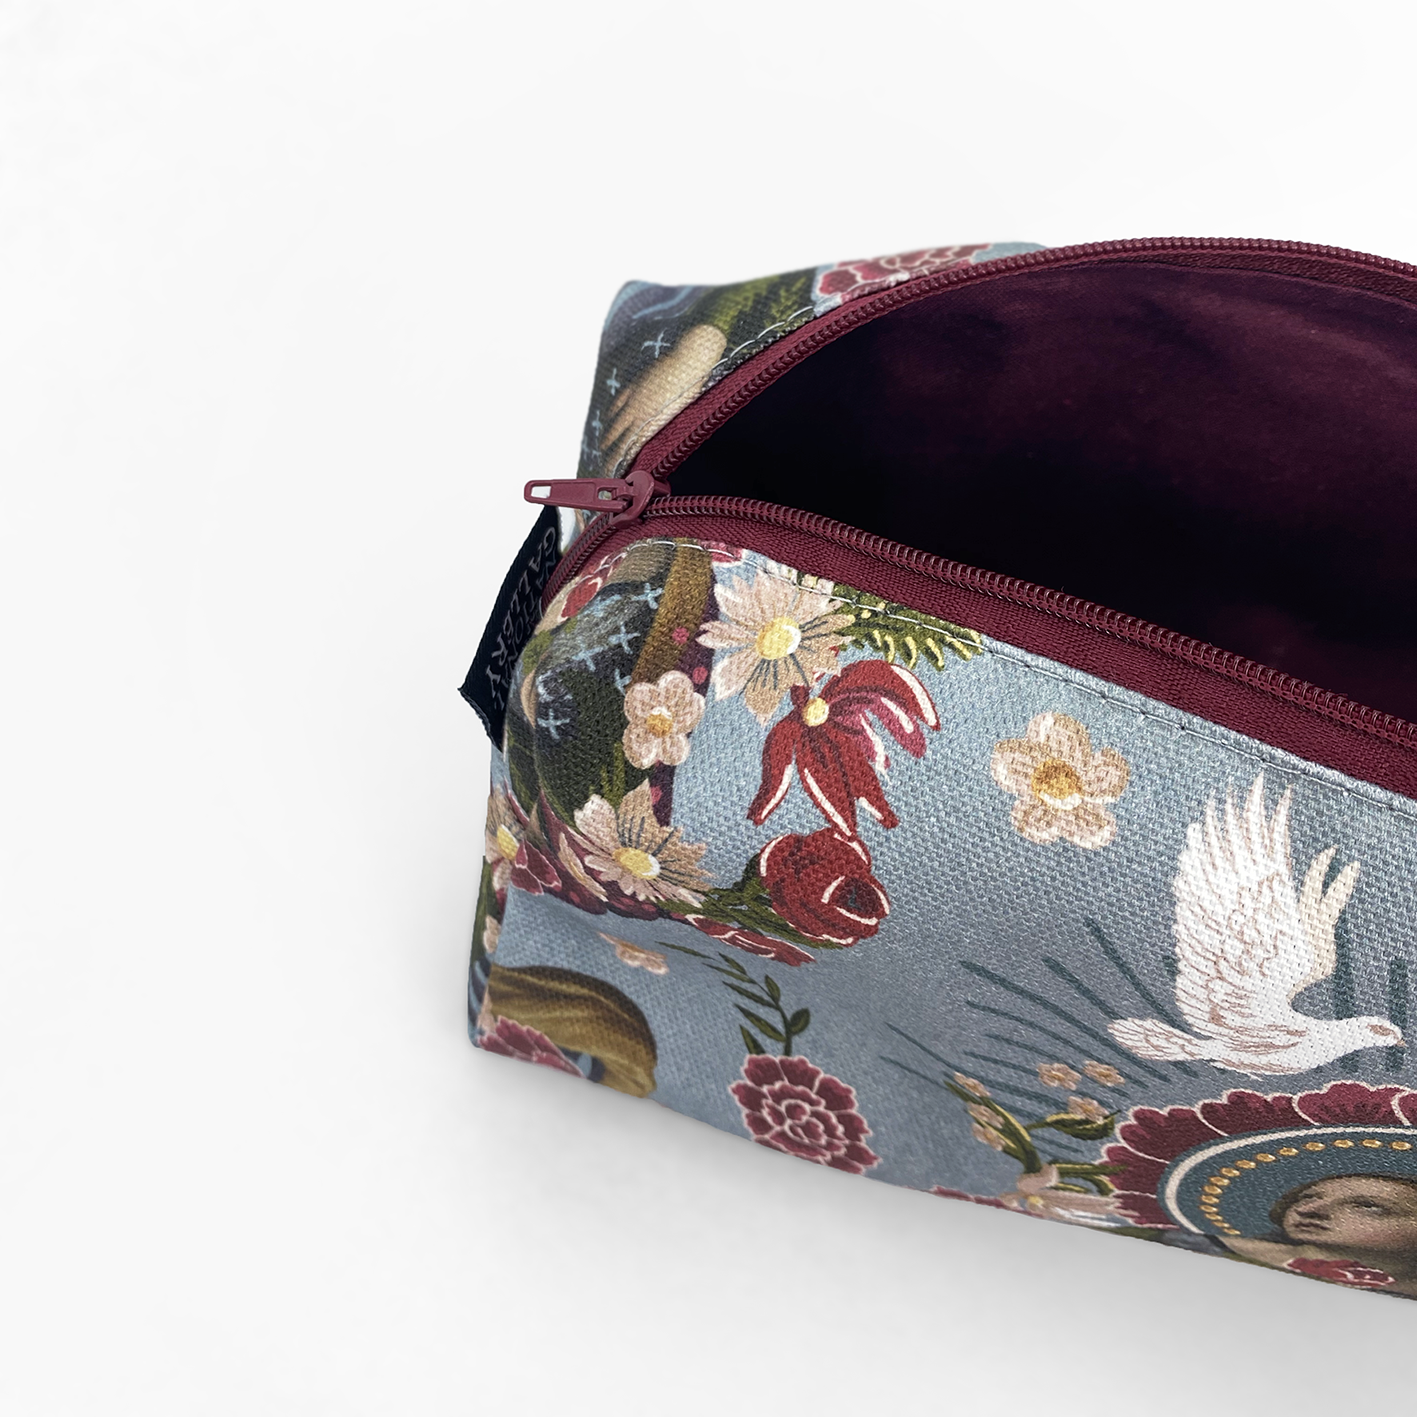 Sustainable box cosmetic bag with fabric lining by Paul Bristow Associates and made in the UK for The National Gallery in London